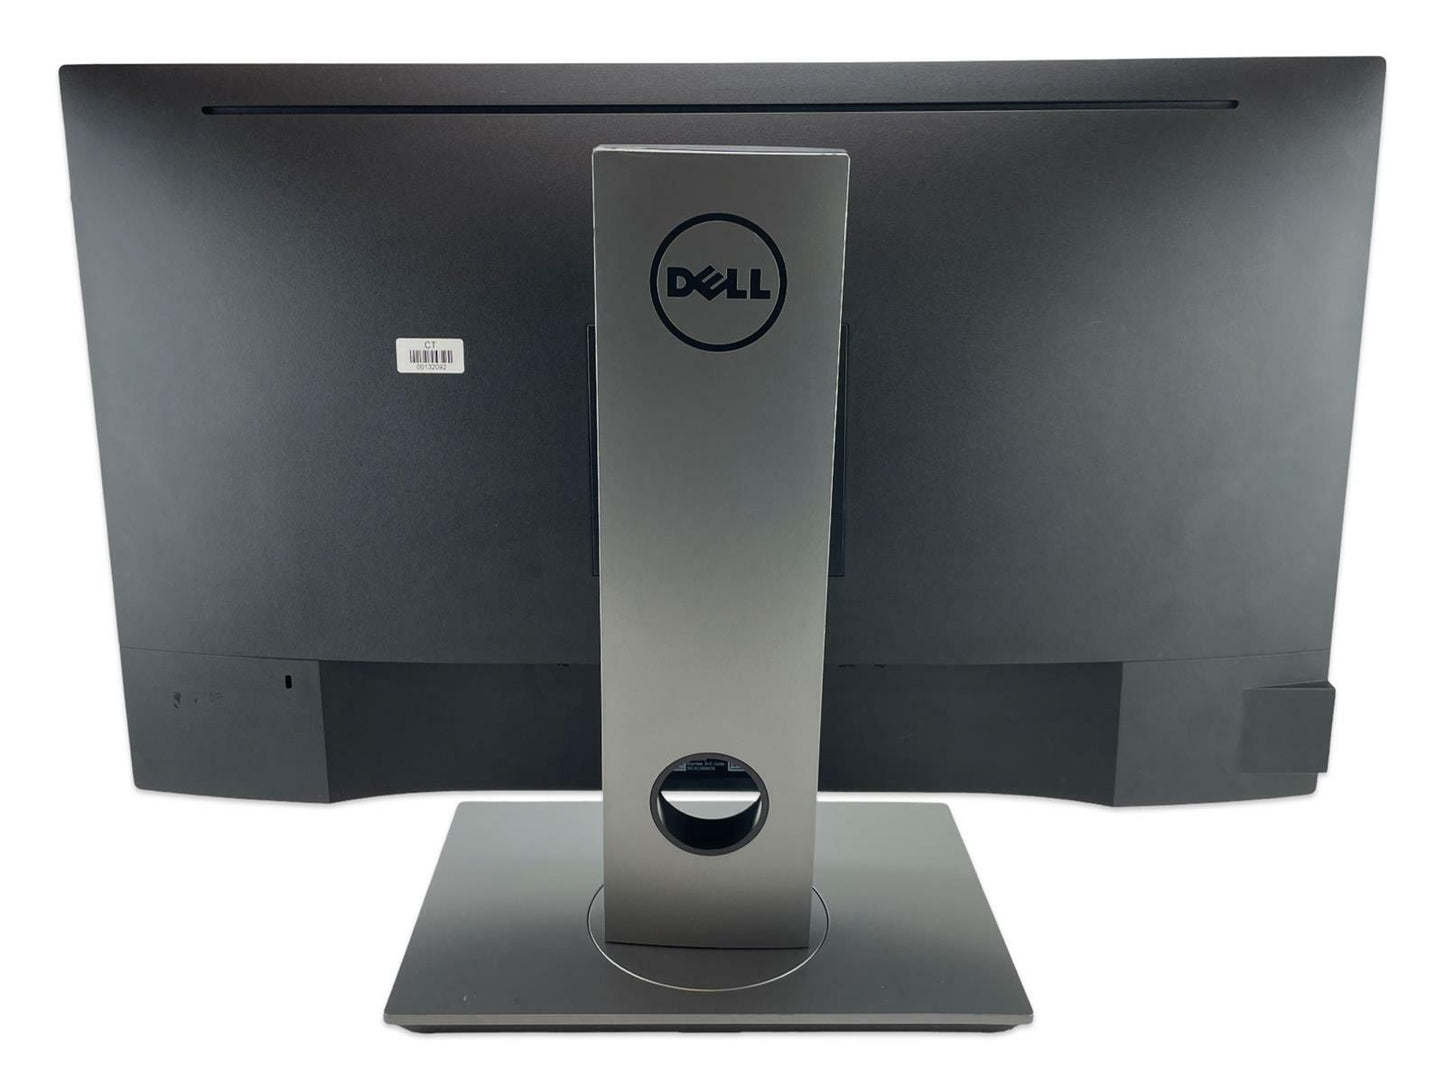 Dell P2717H 27" Full HD IPS LED Backlit Widescreen Display Monitor - READ